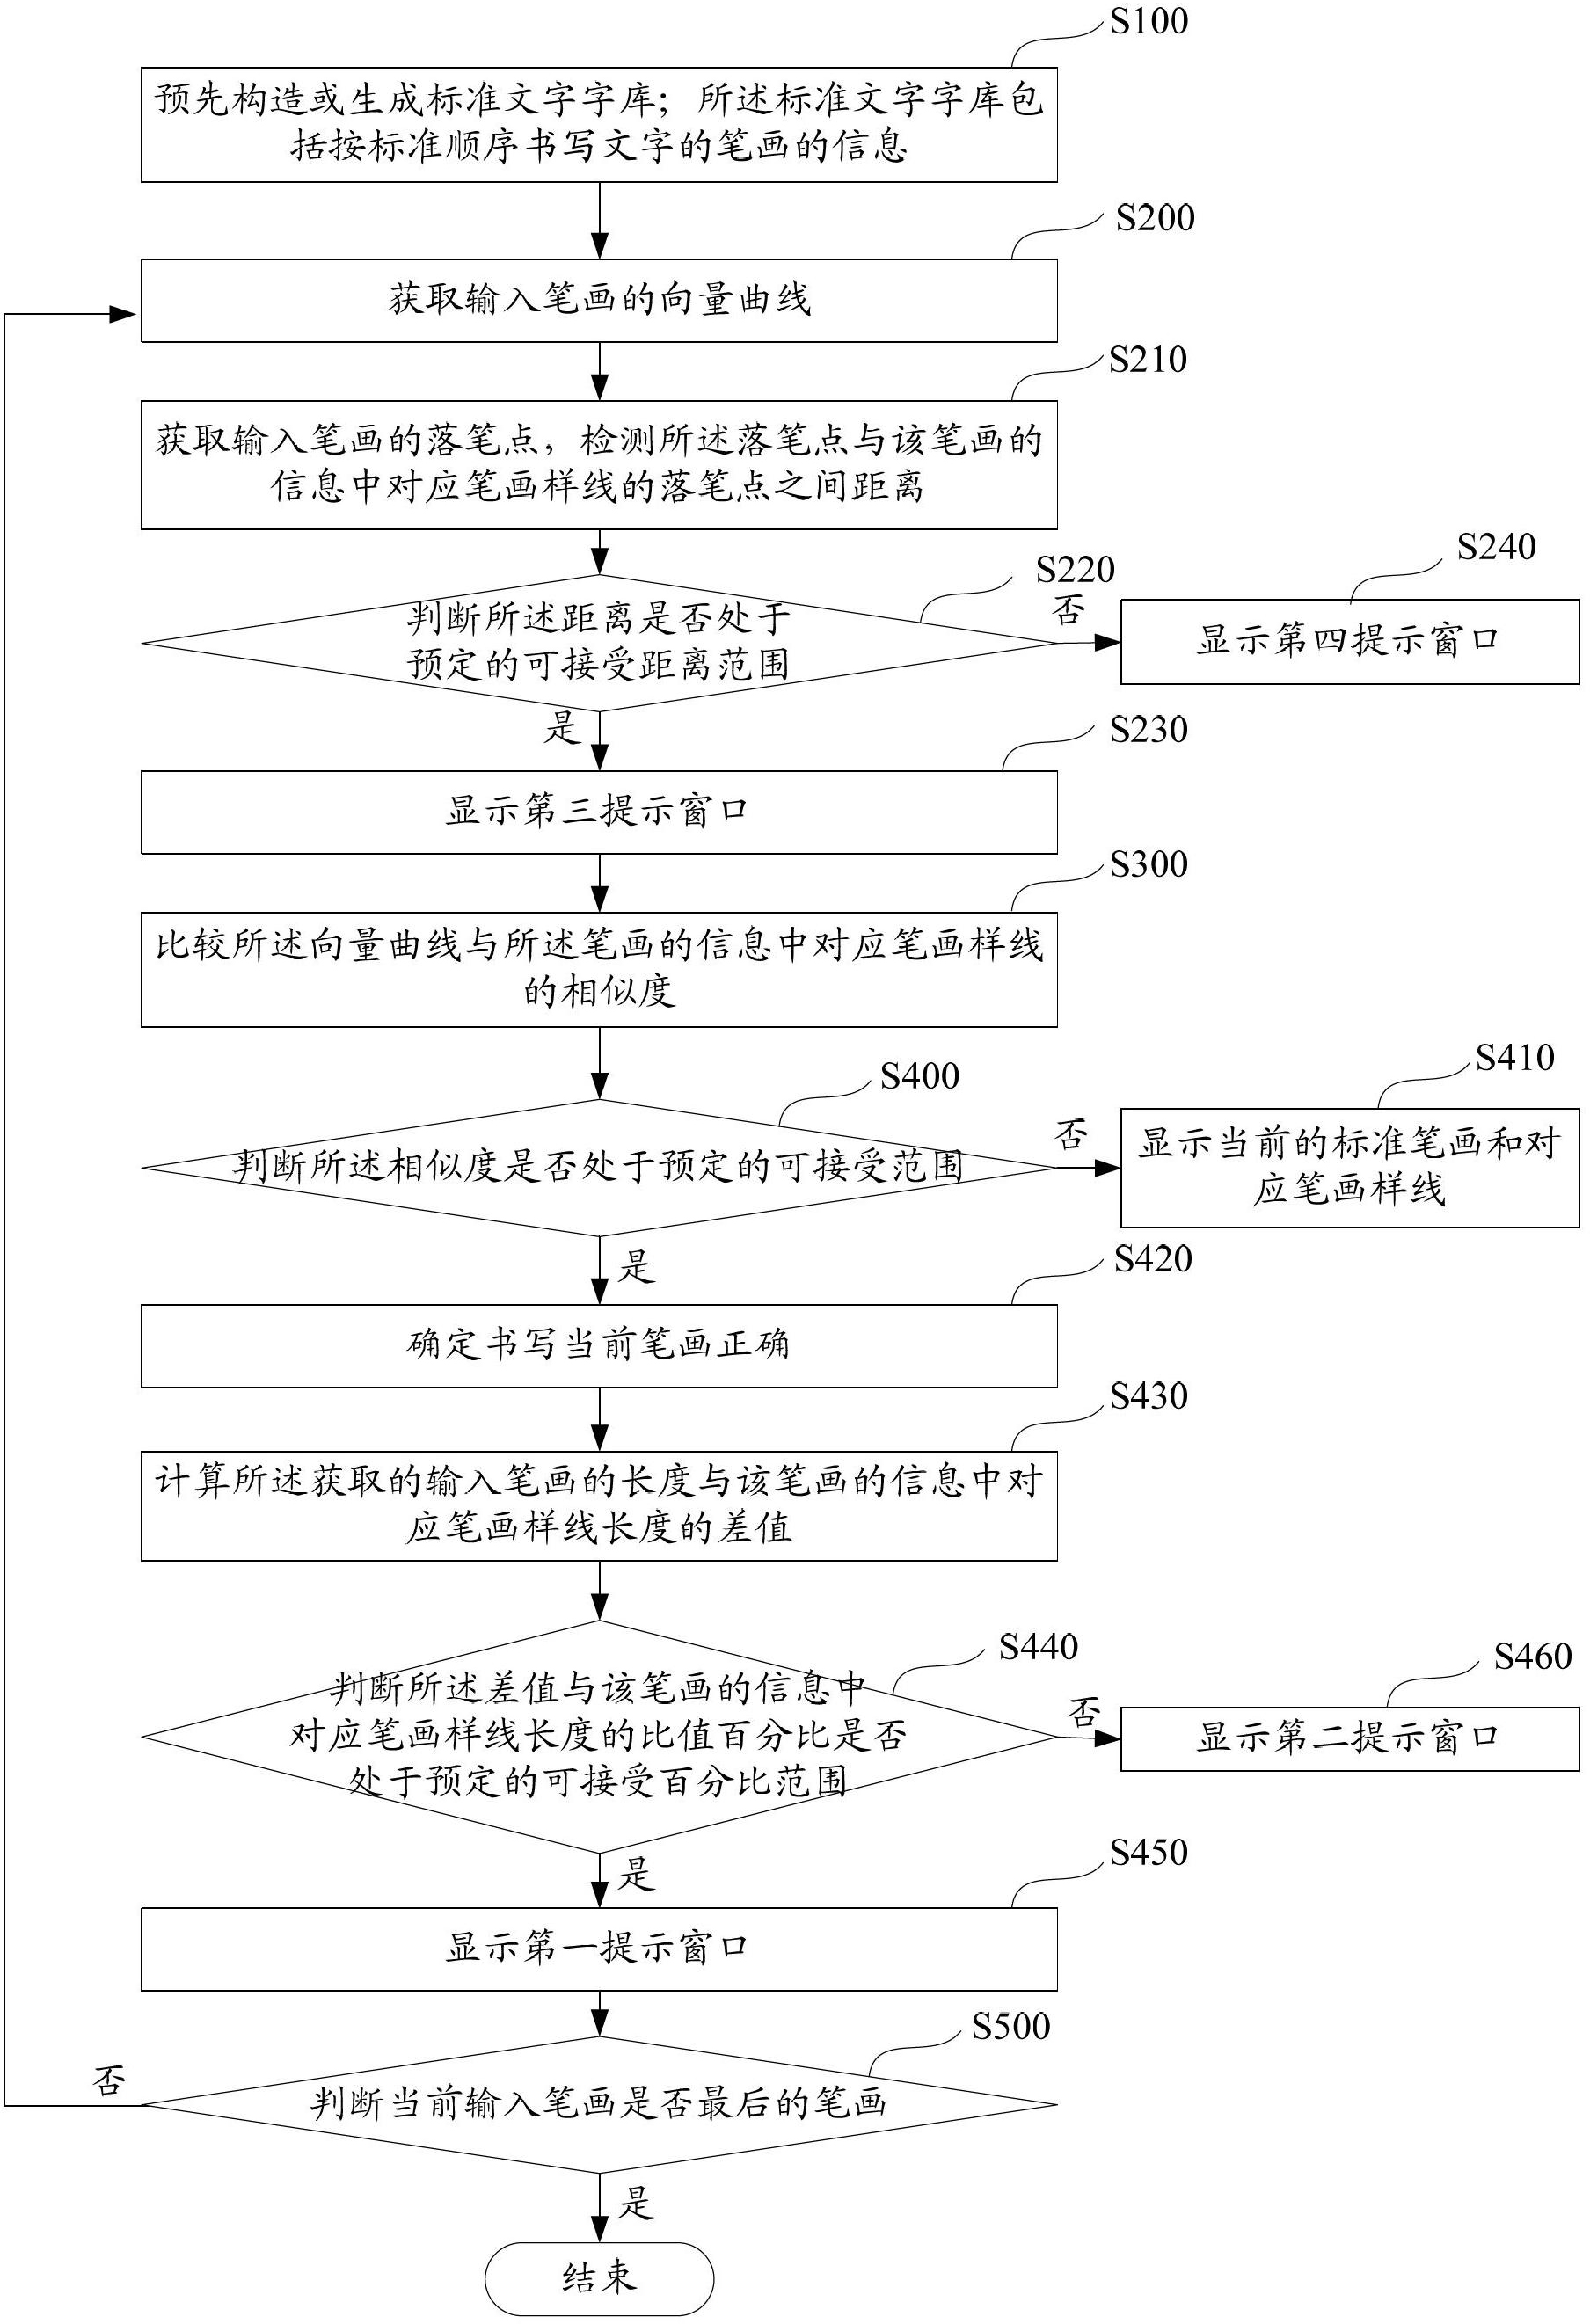 Method and system for learning and practicing characters on electronic device